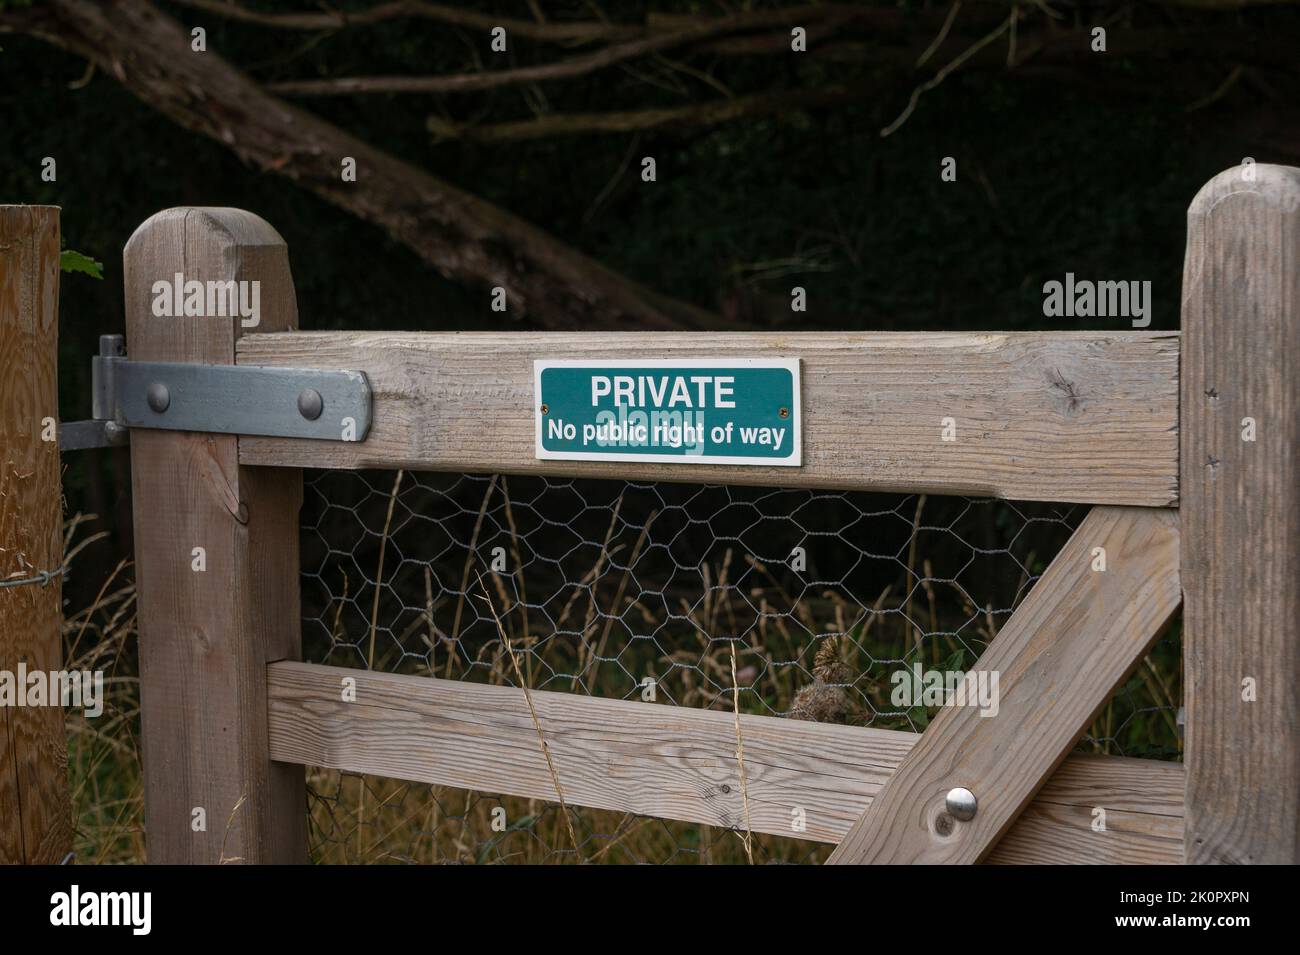 Private, no right of way sign on a wooden gate in the countryside. Stock Photo